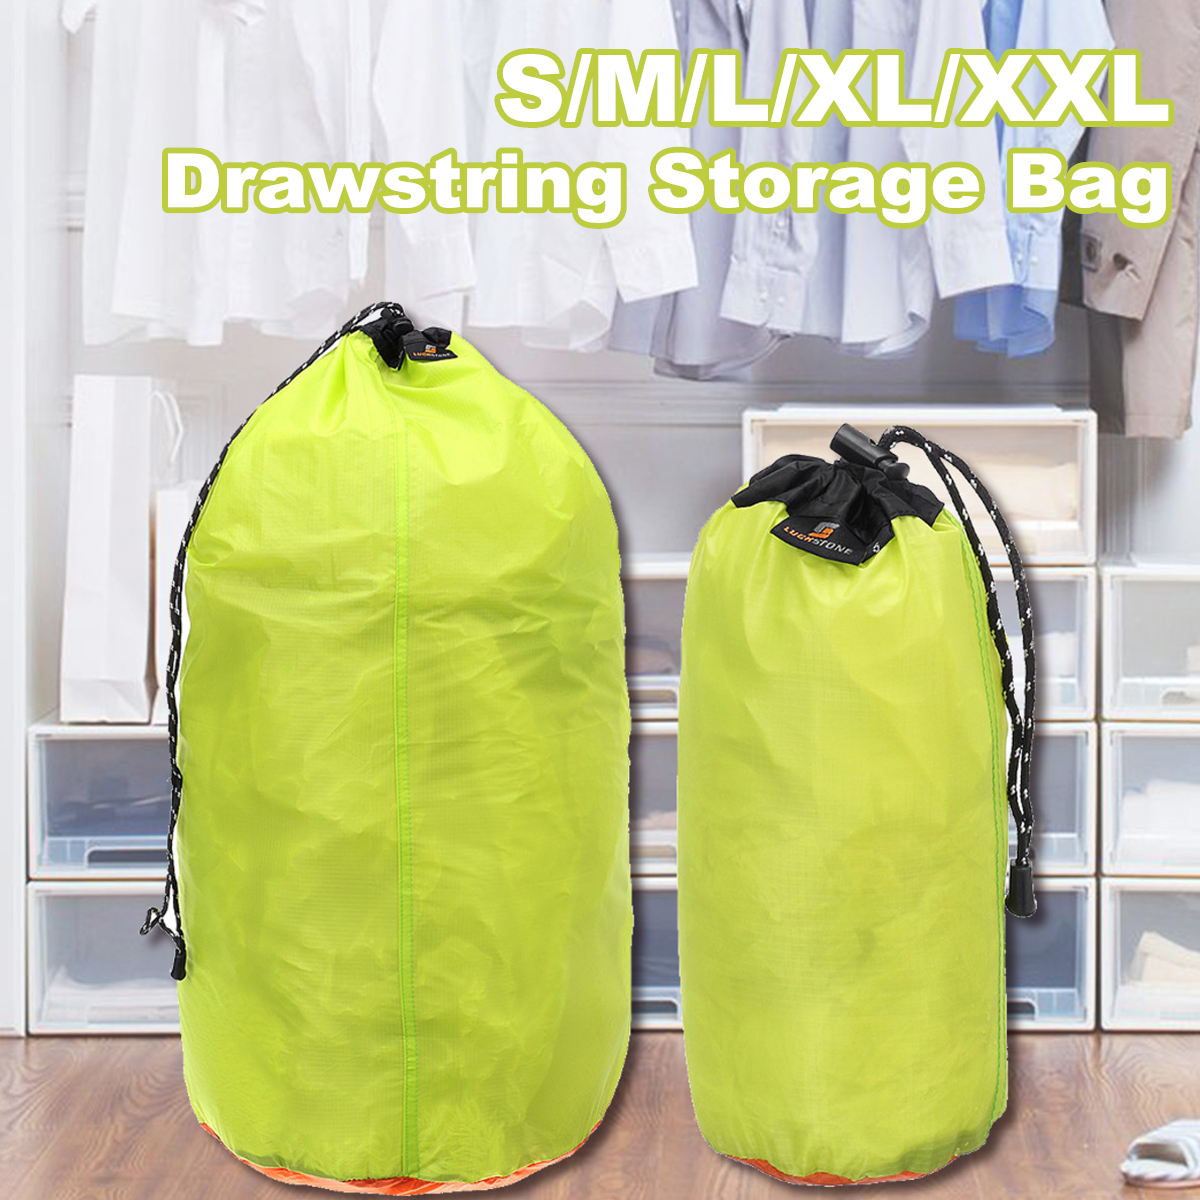 Portable-Drawstring-Storage-Bag-Outdoor-Waterproof-Traveling-Clothes-Shoes-Bag-SMLXL2XL-1555374-1